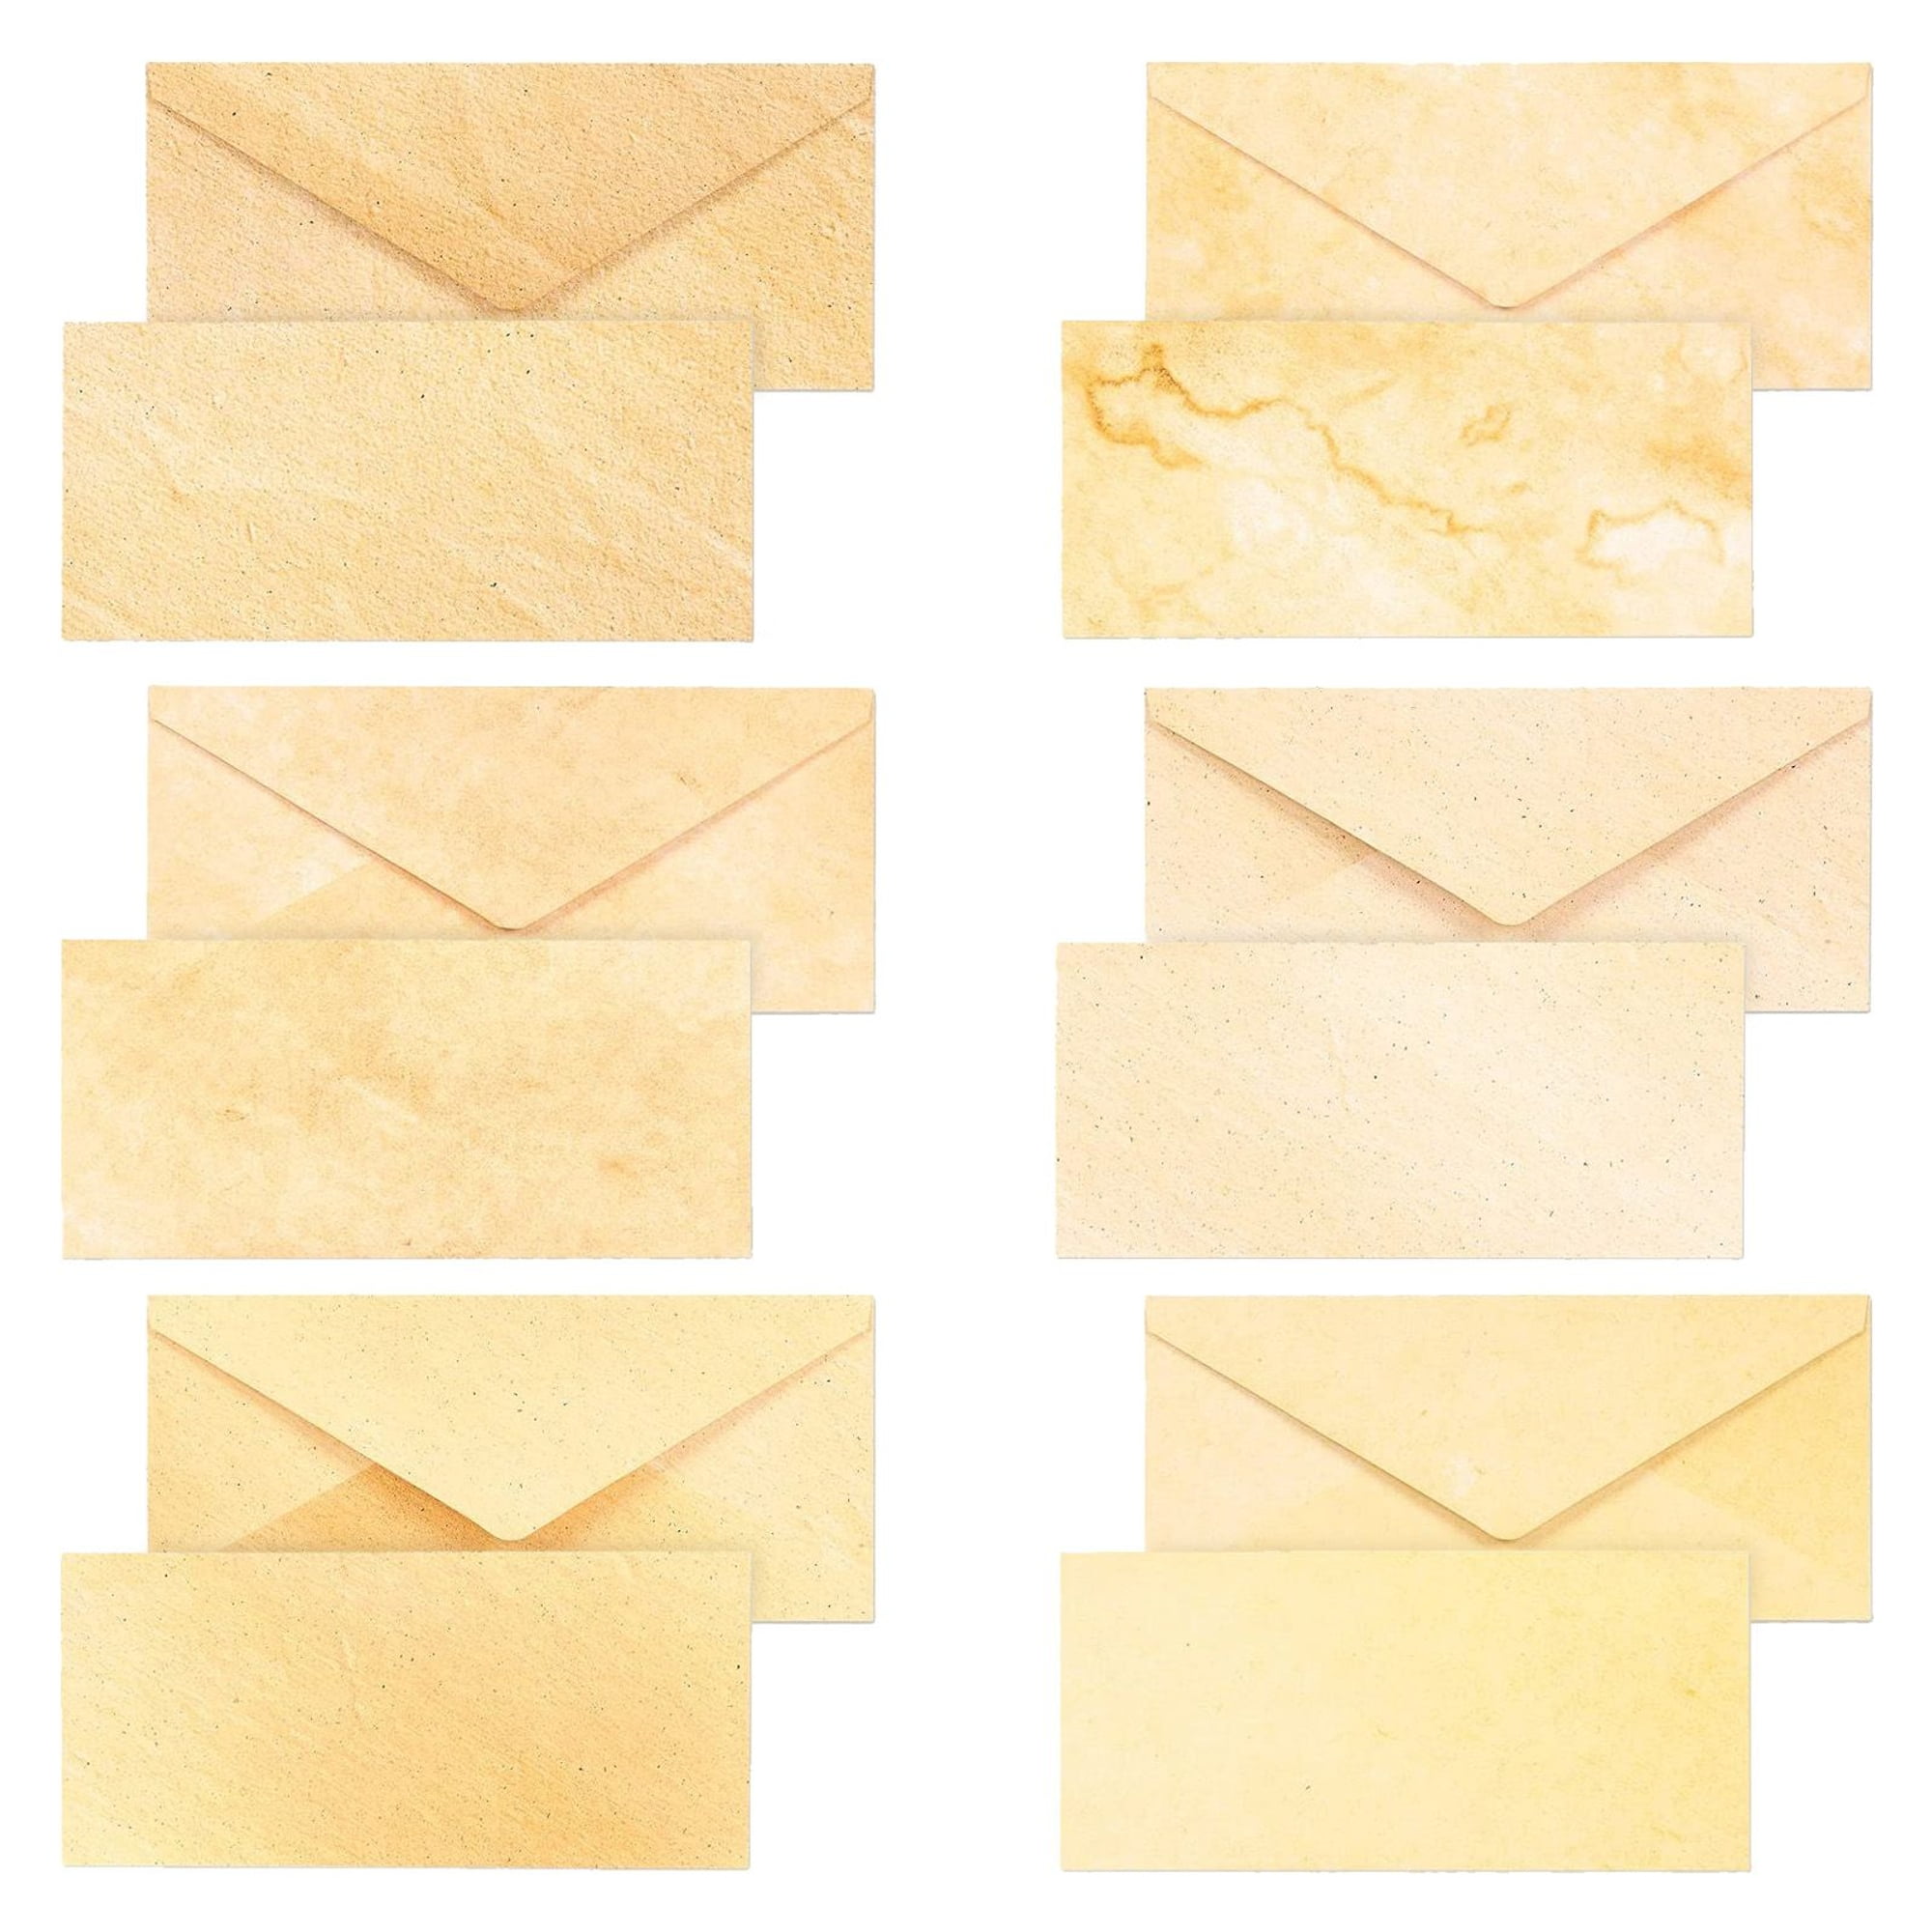 48-Pack Old Fashioned Vintage Envelopes for Writing Letters with 6  Decorative Antique Styles, Classic Aged Blank Envelopes for Party  Invitations, Home Stationery Supplies (8.7x4 in) 